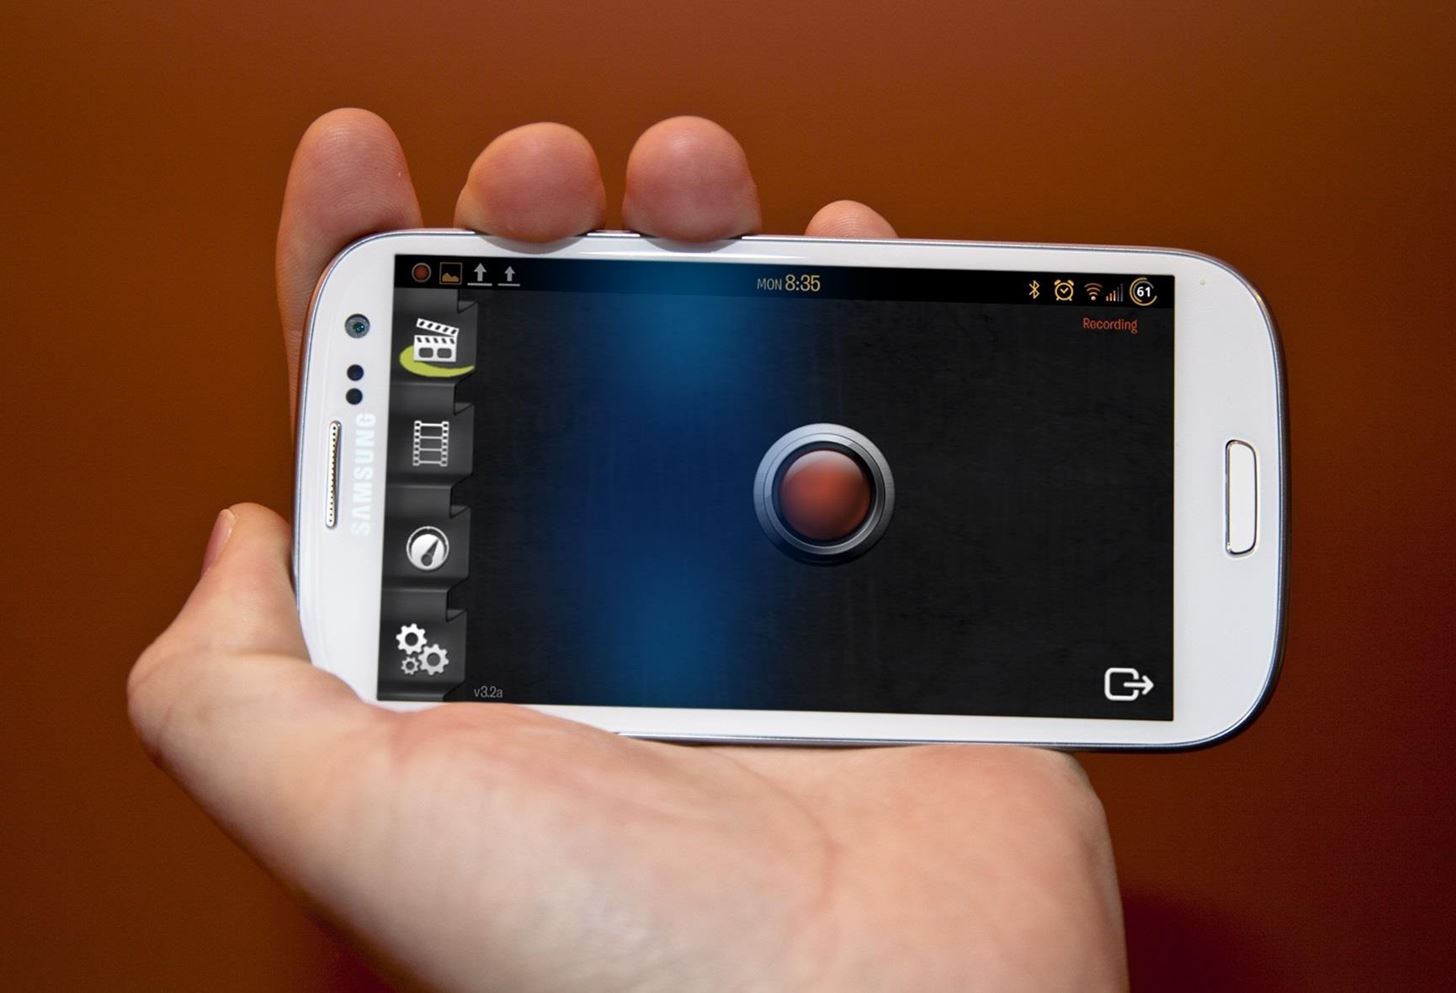 How to Capture a High-Quality Video Recording of Your Samsung Galaxy S3's Screen